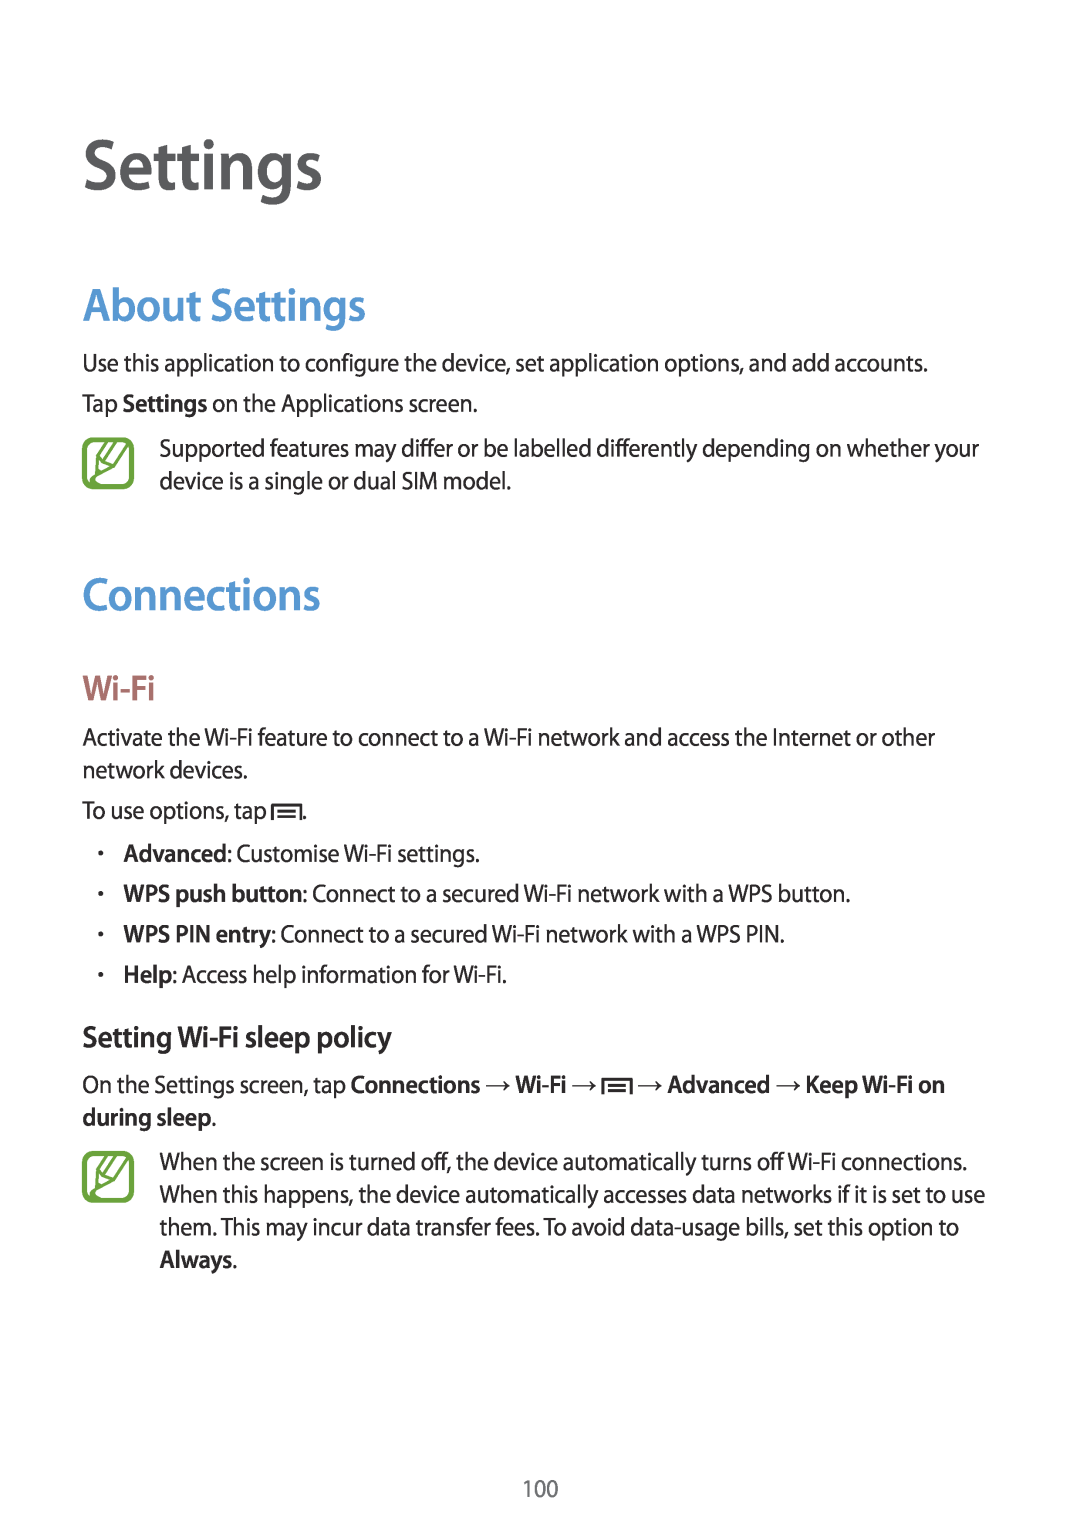 Samsung GT-I9060MKASEB, GT-I9060EGAXEF, GT-I9060ZWAXEF manual About Settings, Connections, Setting Wi-Fi sleep policy 